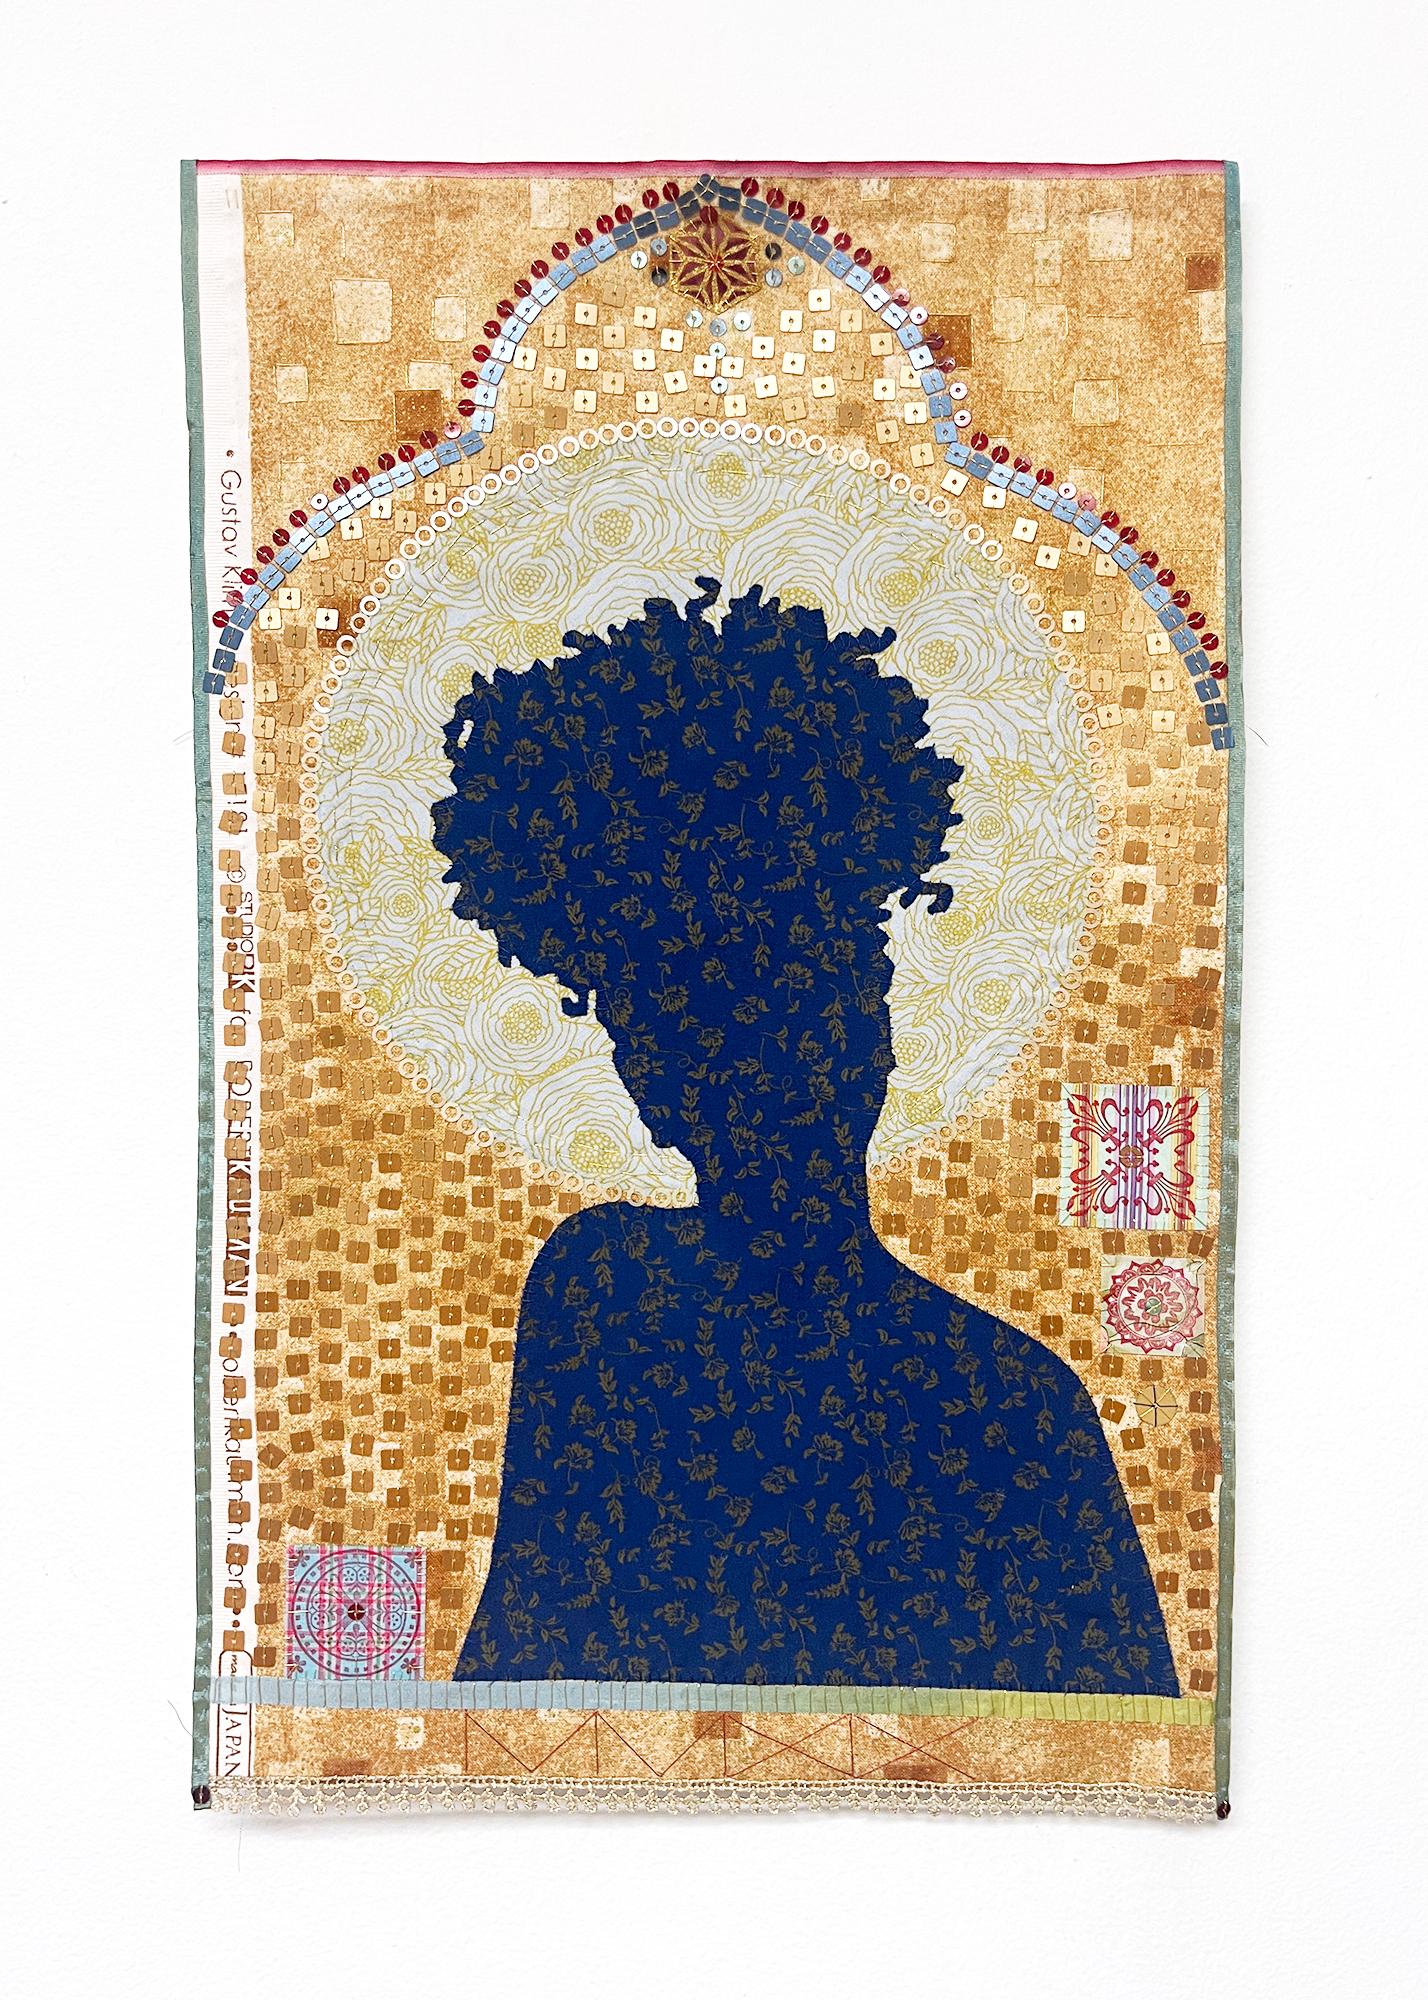 Untitled MM9, silhouette, pattern, textile, icon, gold, blue, red - Sculpture by Jan Testori - Markman